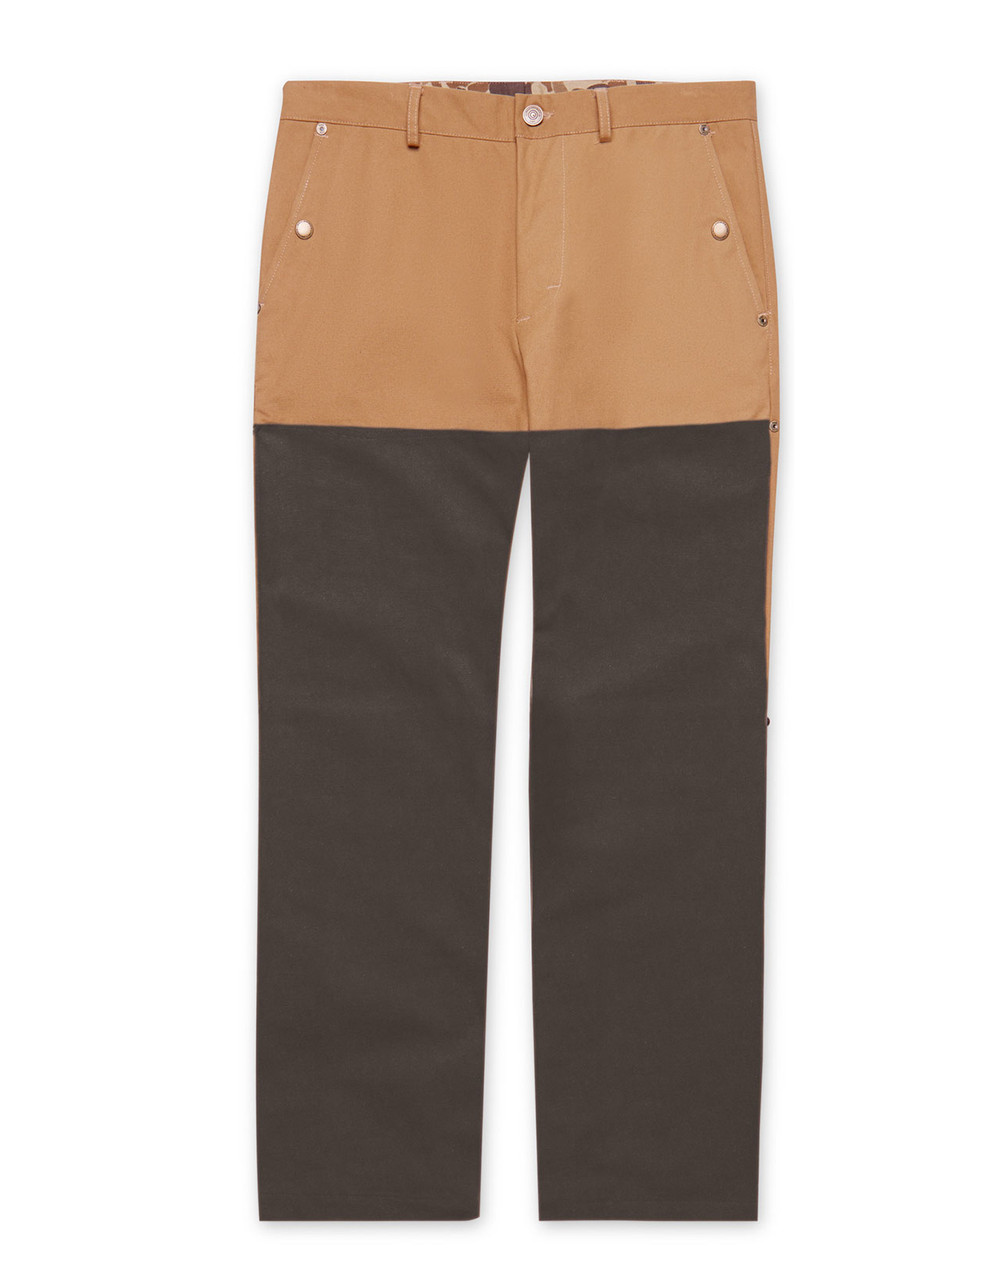 20oz-field-pant-in-signature-canvas-1__87840